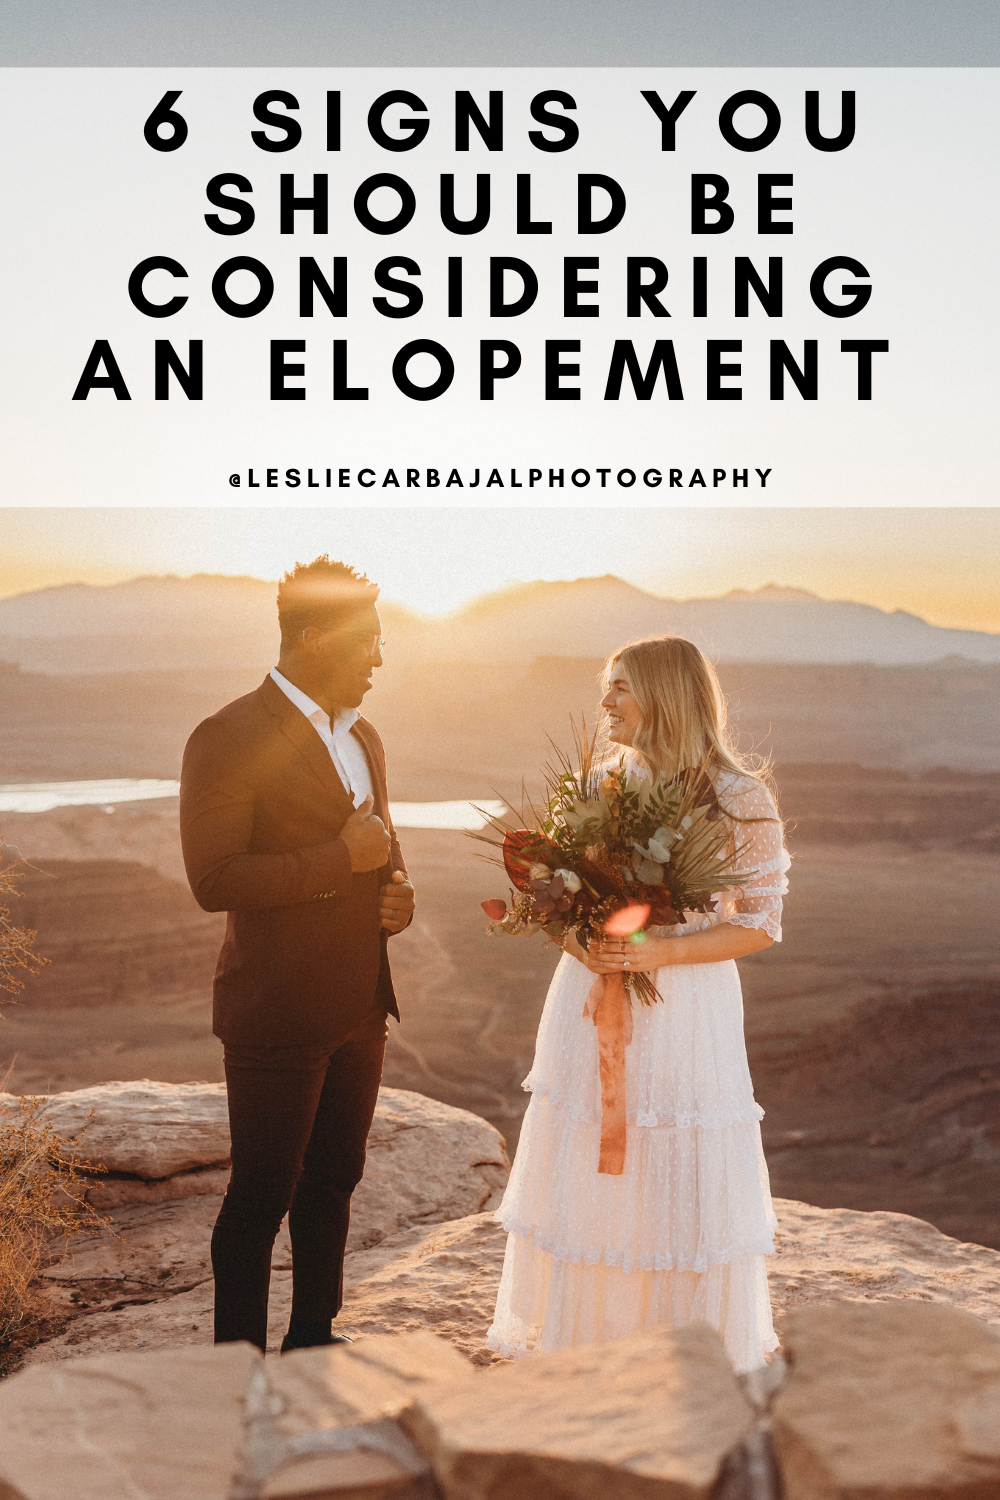 6 signs you should be considering an elopement, utah sunrise elopement, how do i know if I want to elope, lets elope